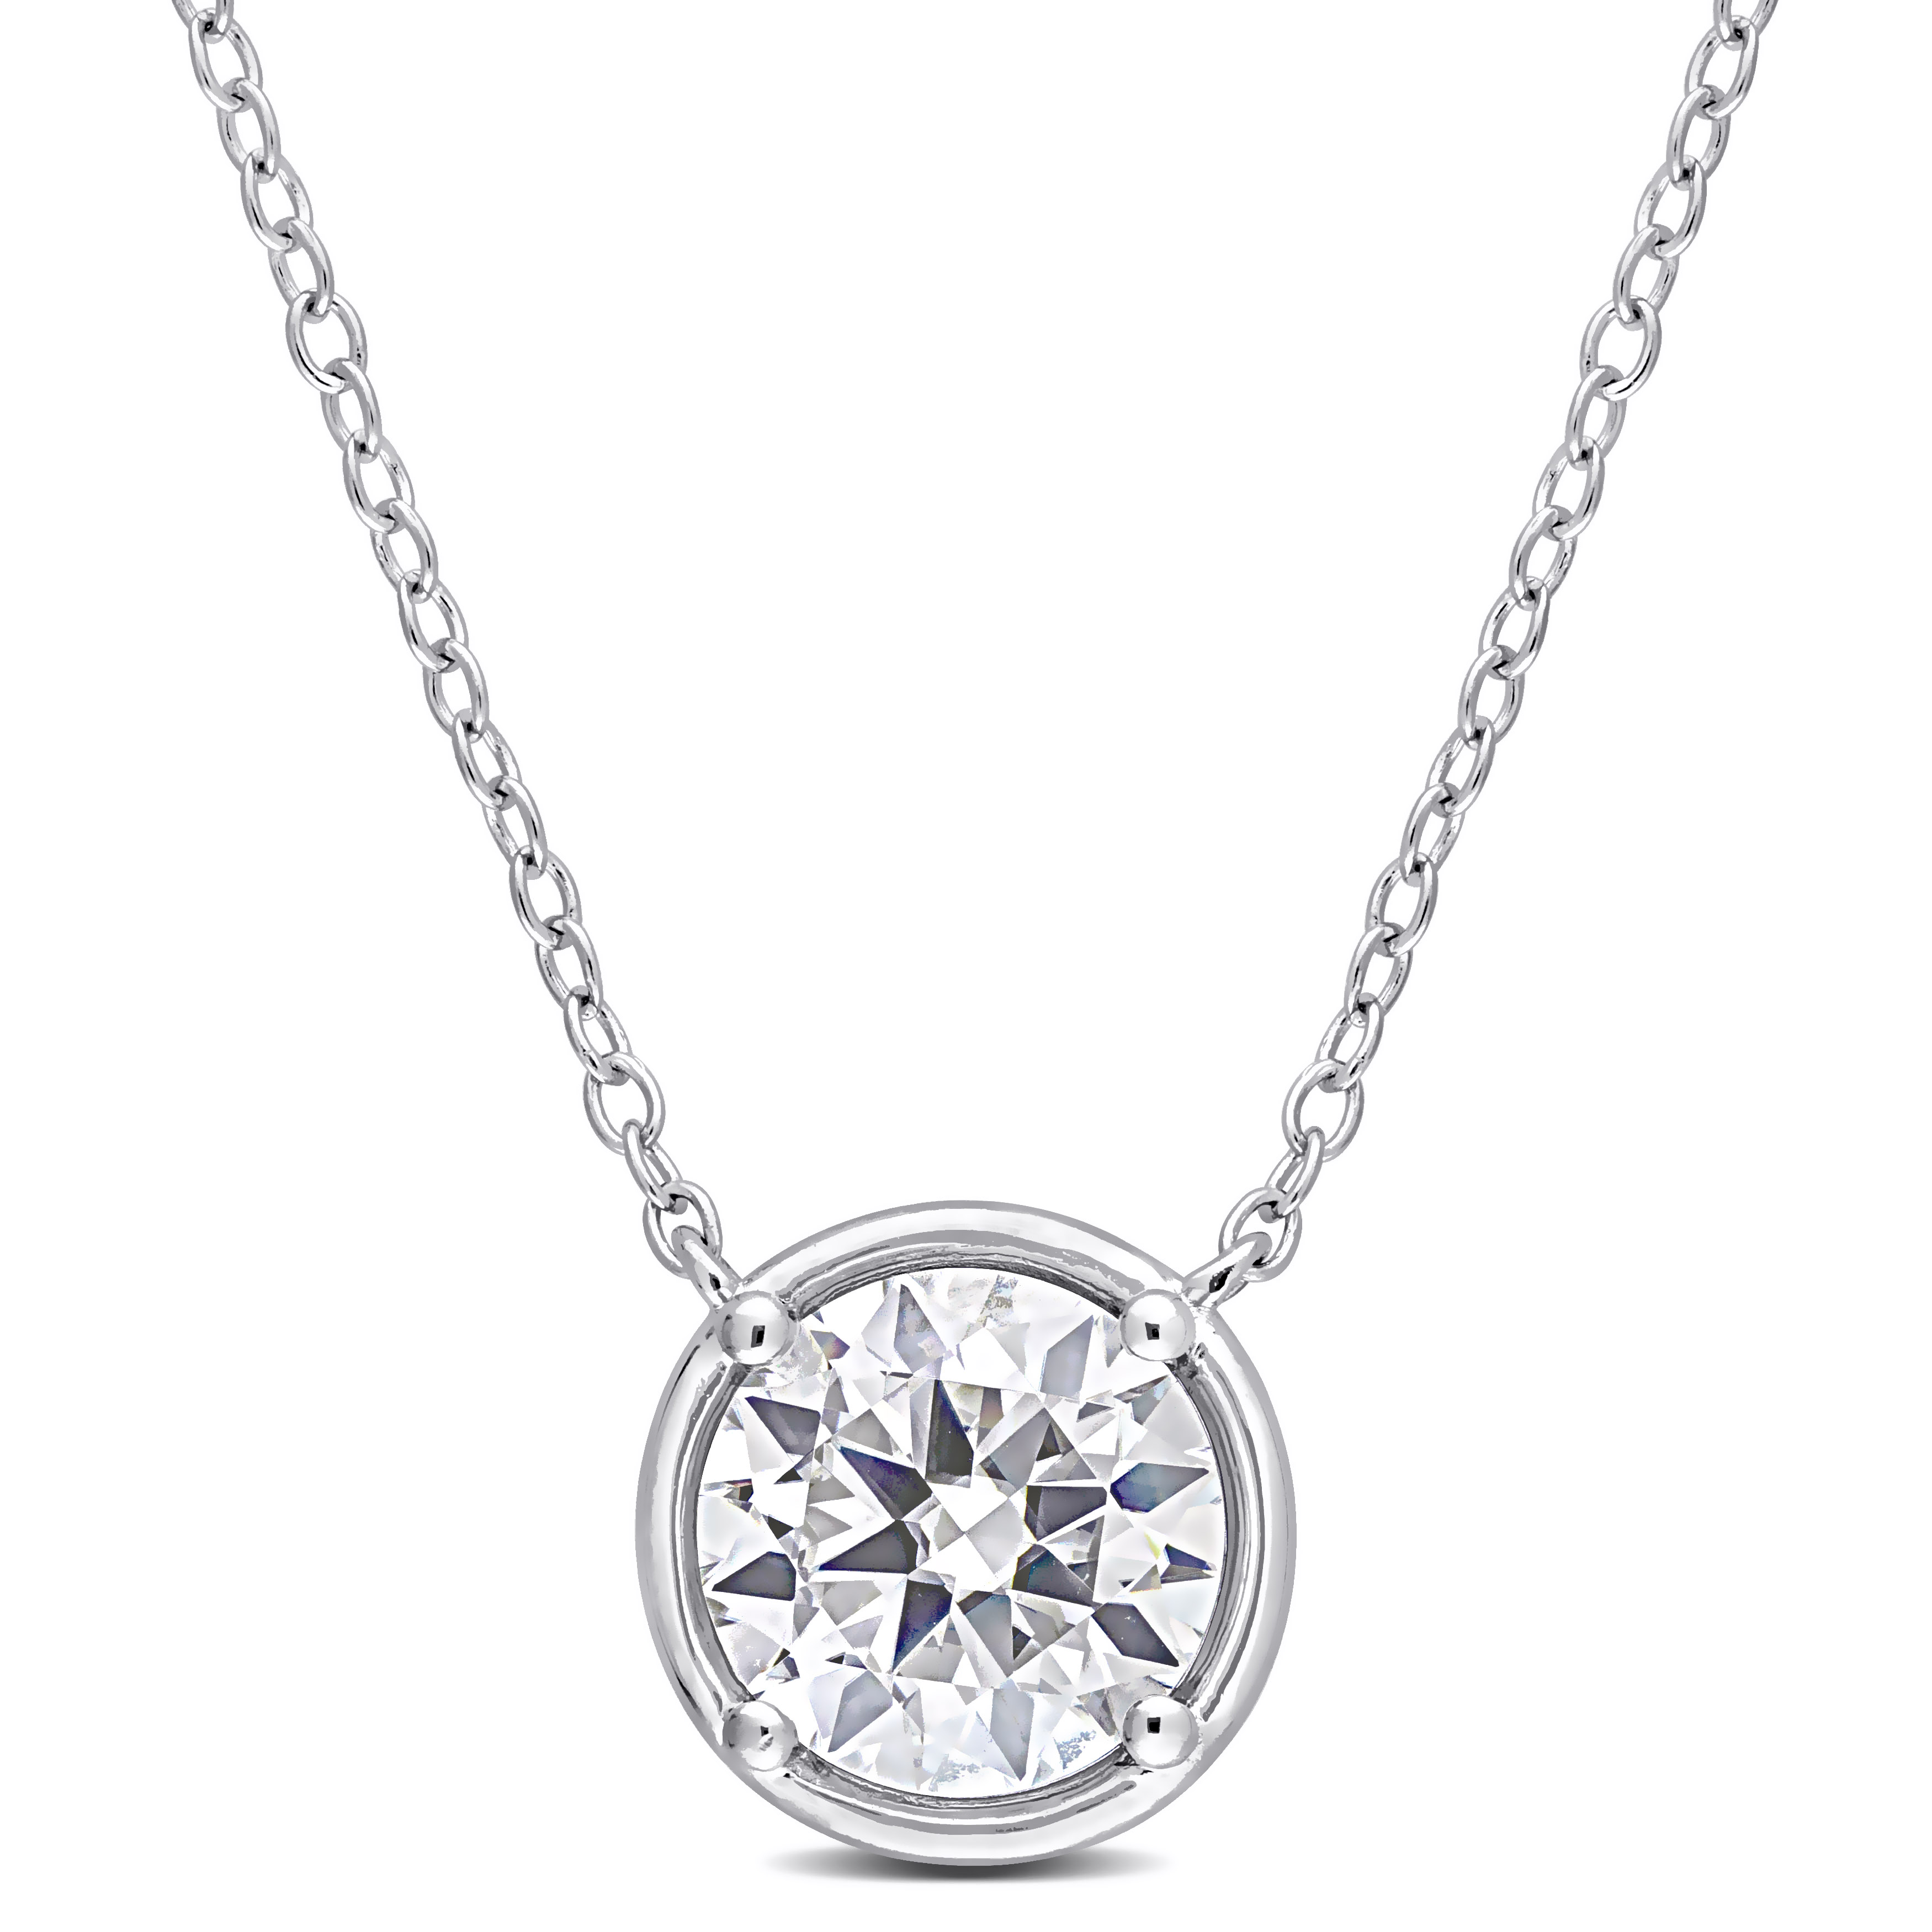 1 4/5 CT TGW Created Moissanite Halo Circle Pendant with Chain in Sterling Silver